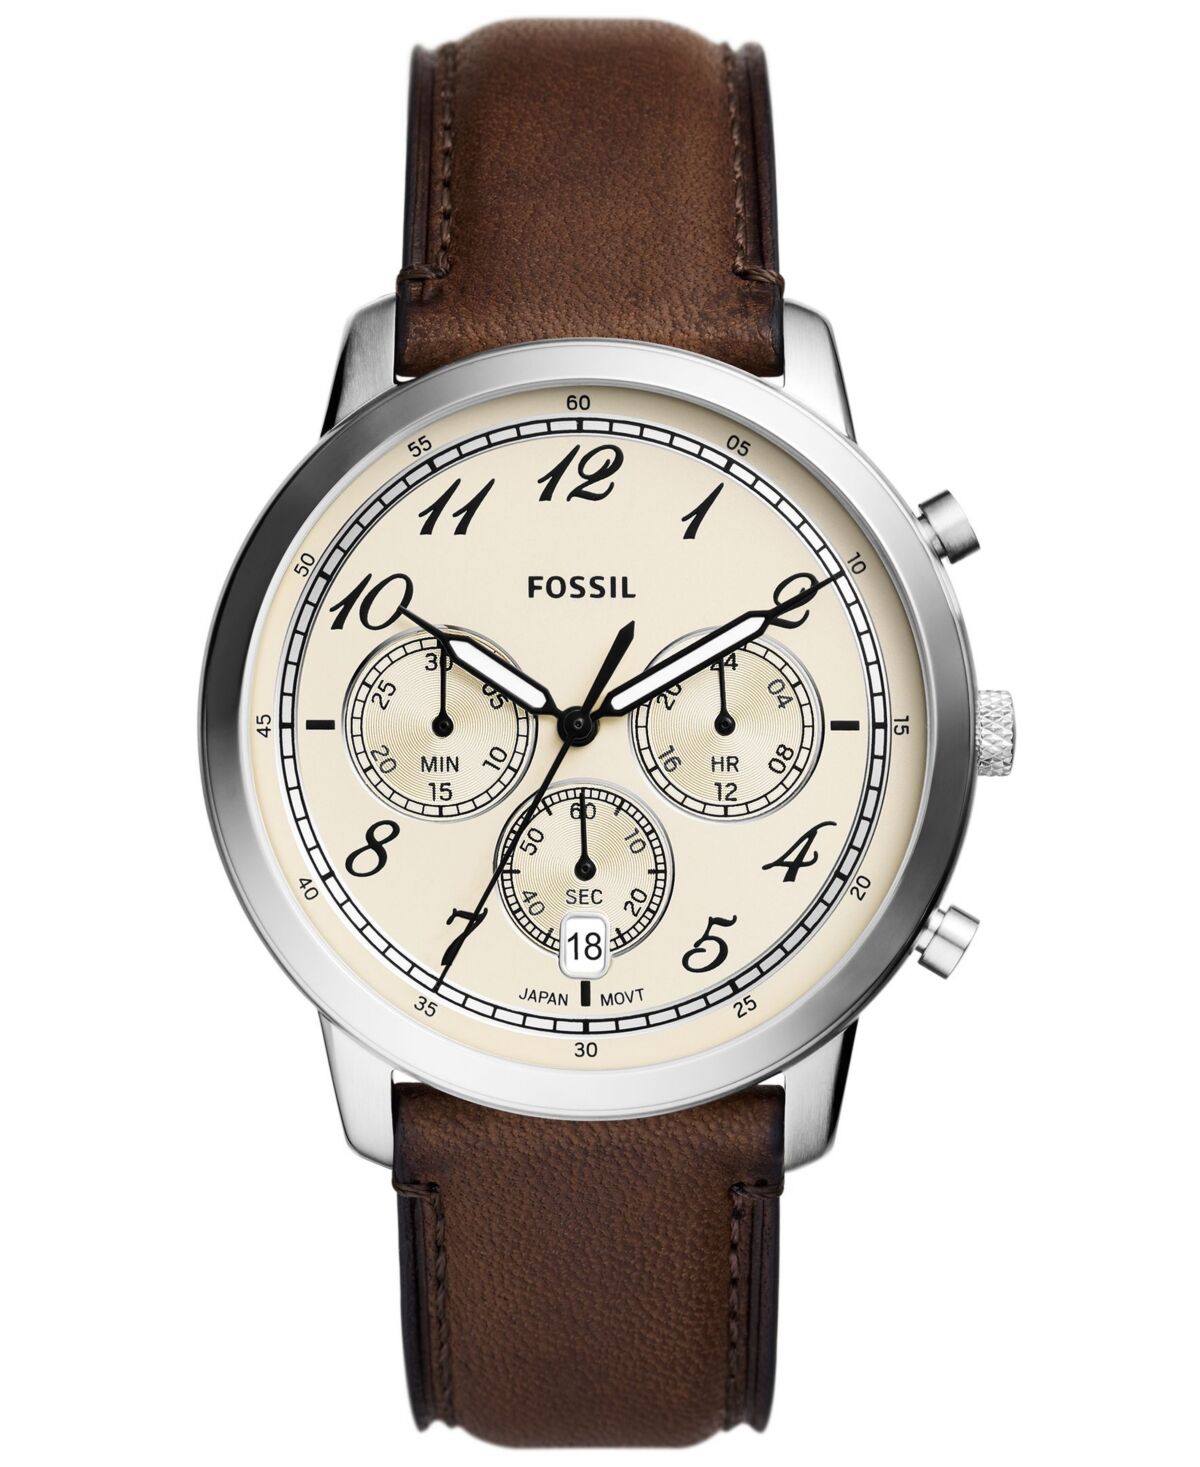 Fossil Men's Neutra Chronograph Brown Leather Watch 44mm - Brown